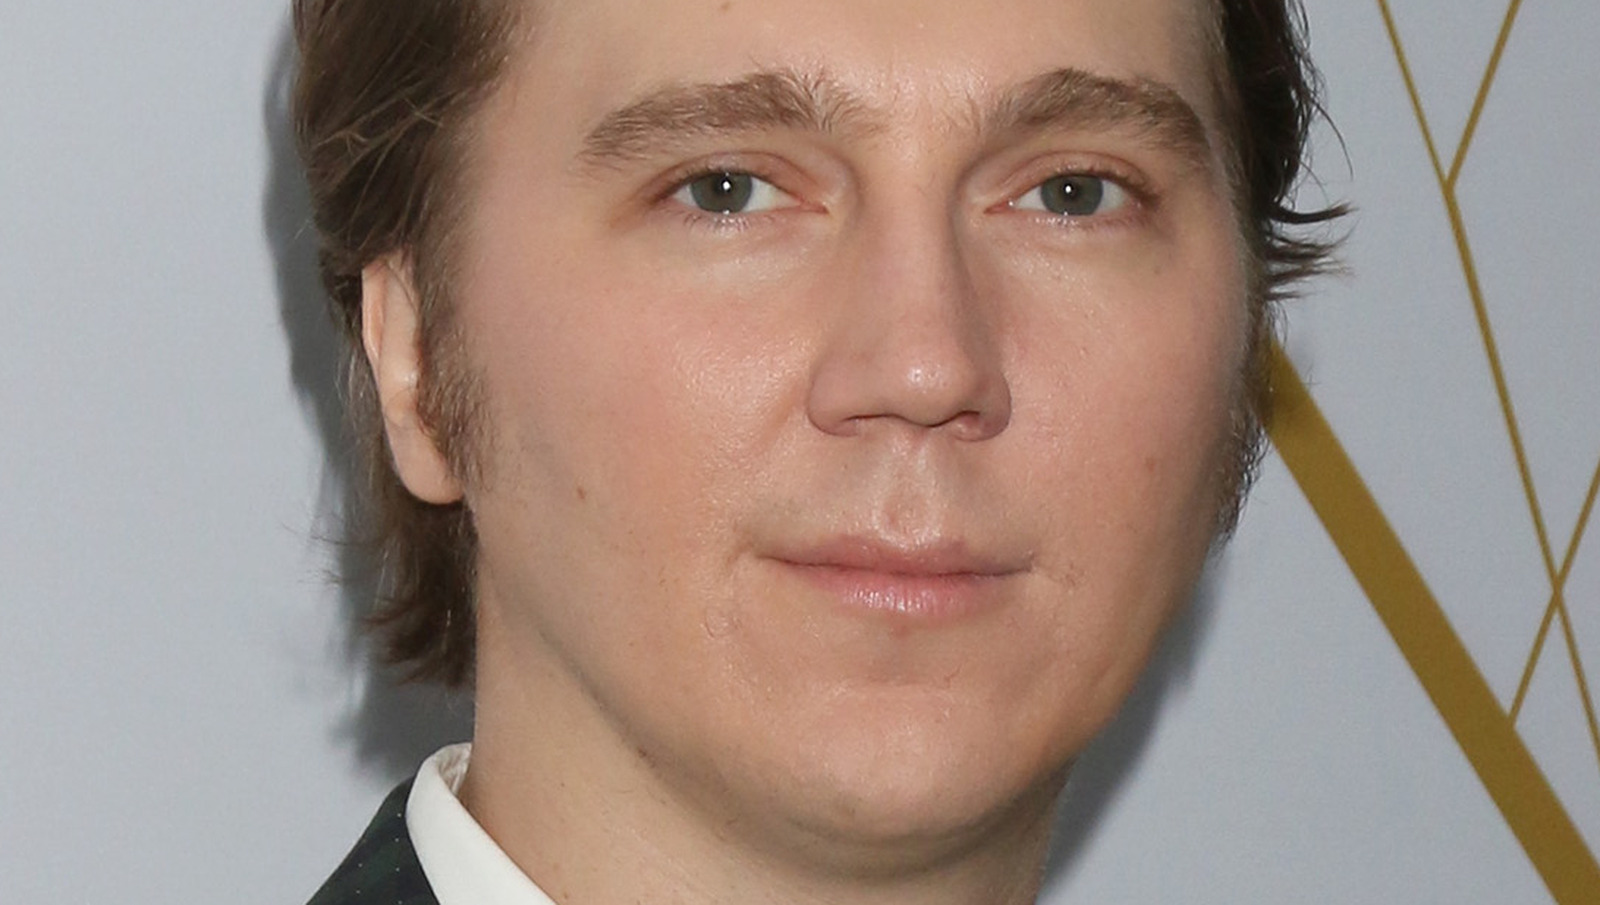 Paul Dano An Inside Look At His Life And Career pic